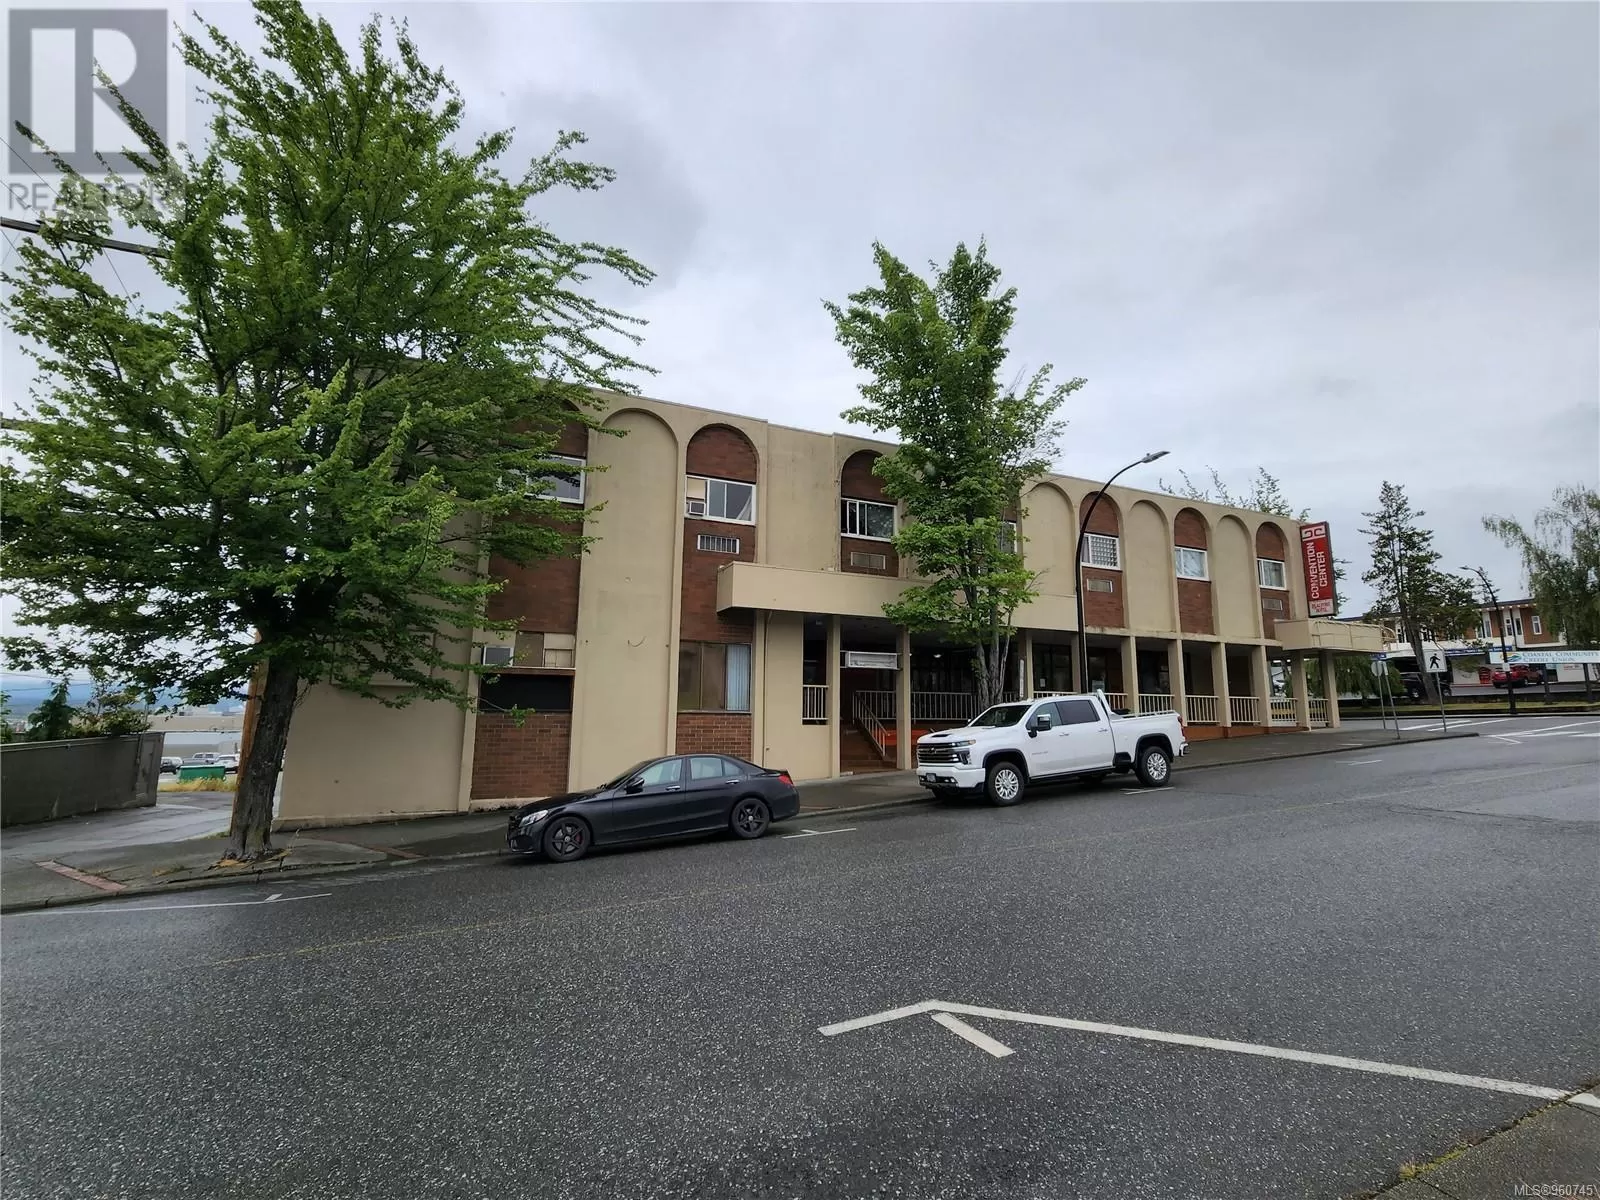 Commercial Mix for rent: 4963 Angus St, Port Alberni, British Columbia V9Y 7Z4